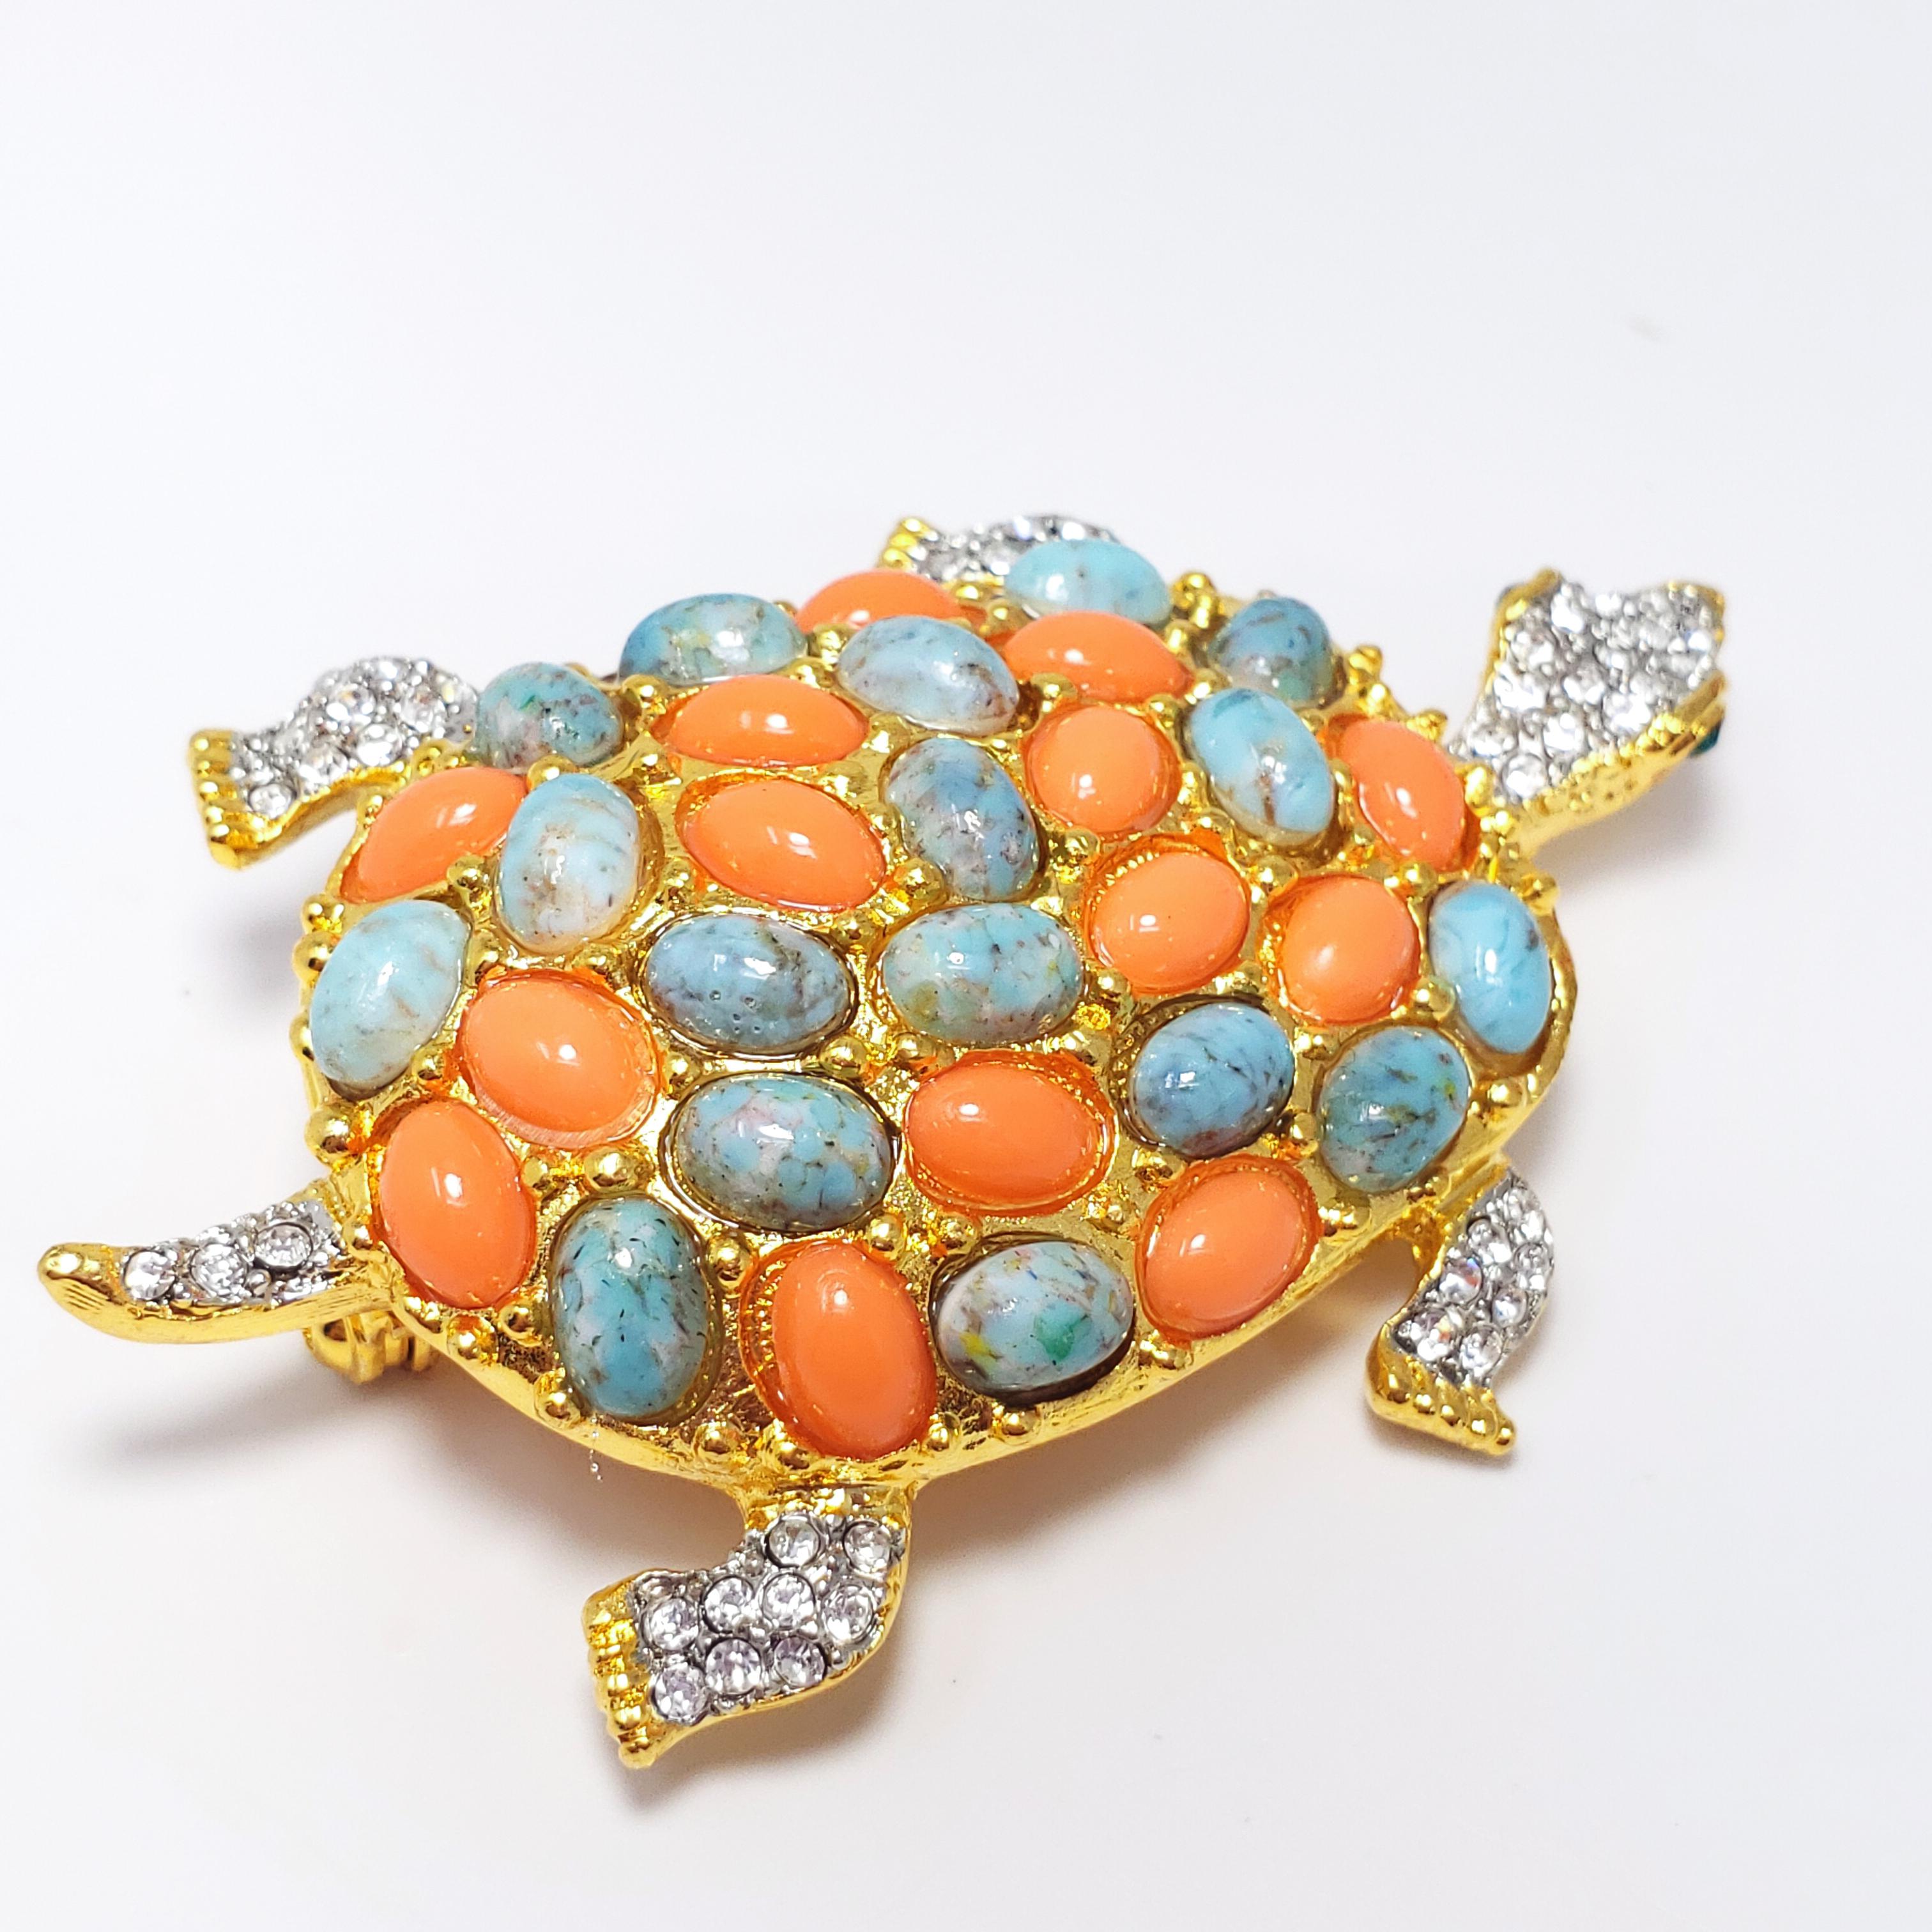 Women's or Men's KJL Kenneth Jay Lane Pave Cabochon & Crystal Turtle Brooch Pin in Gold